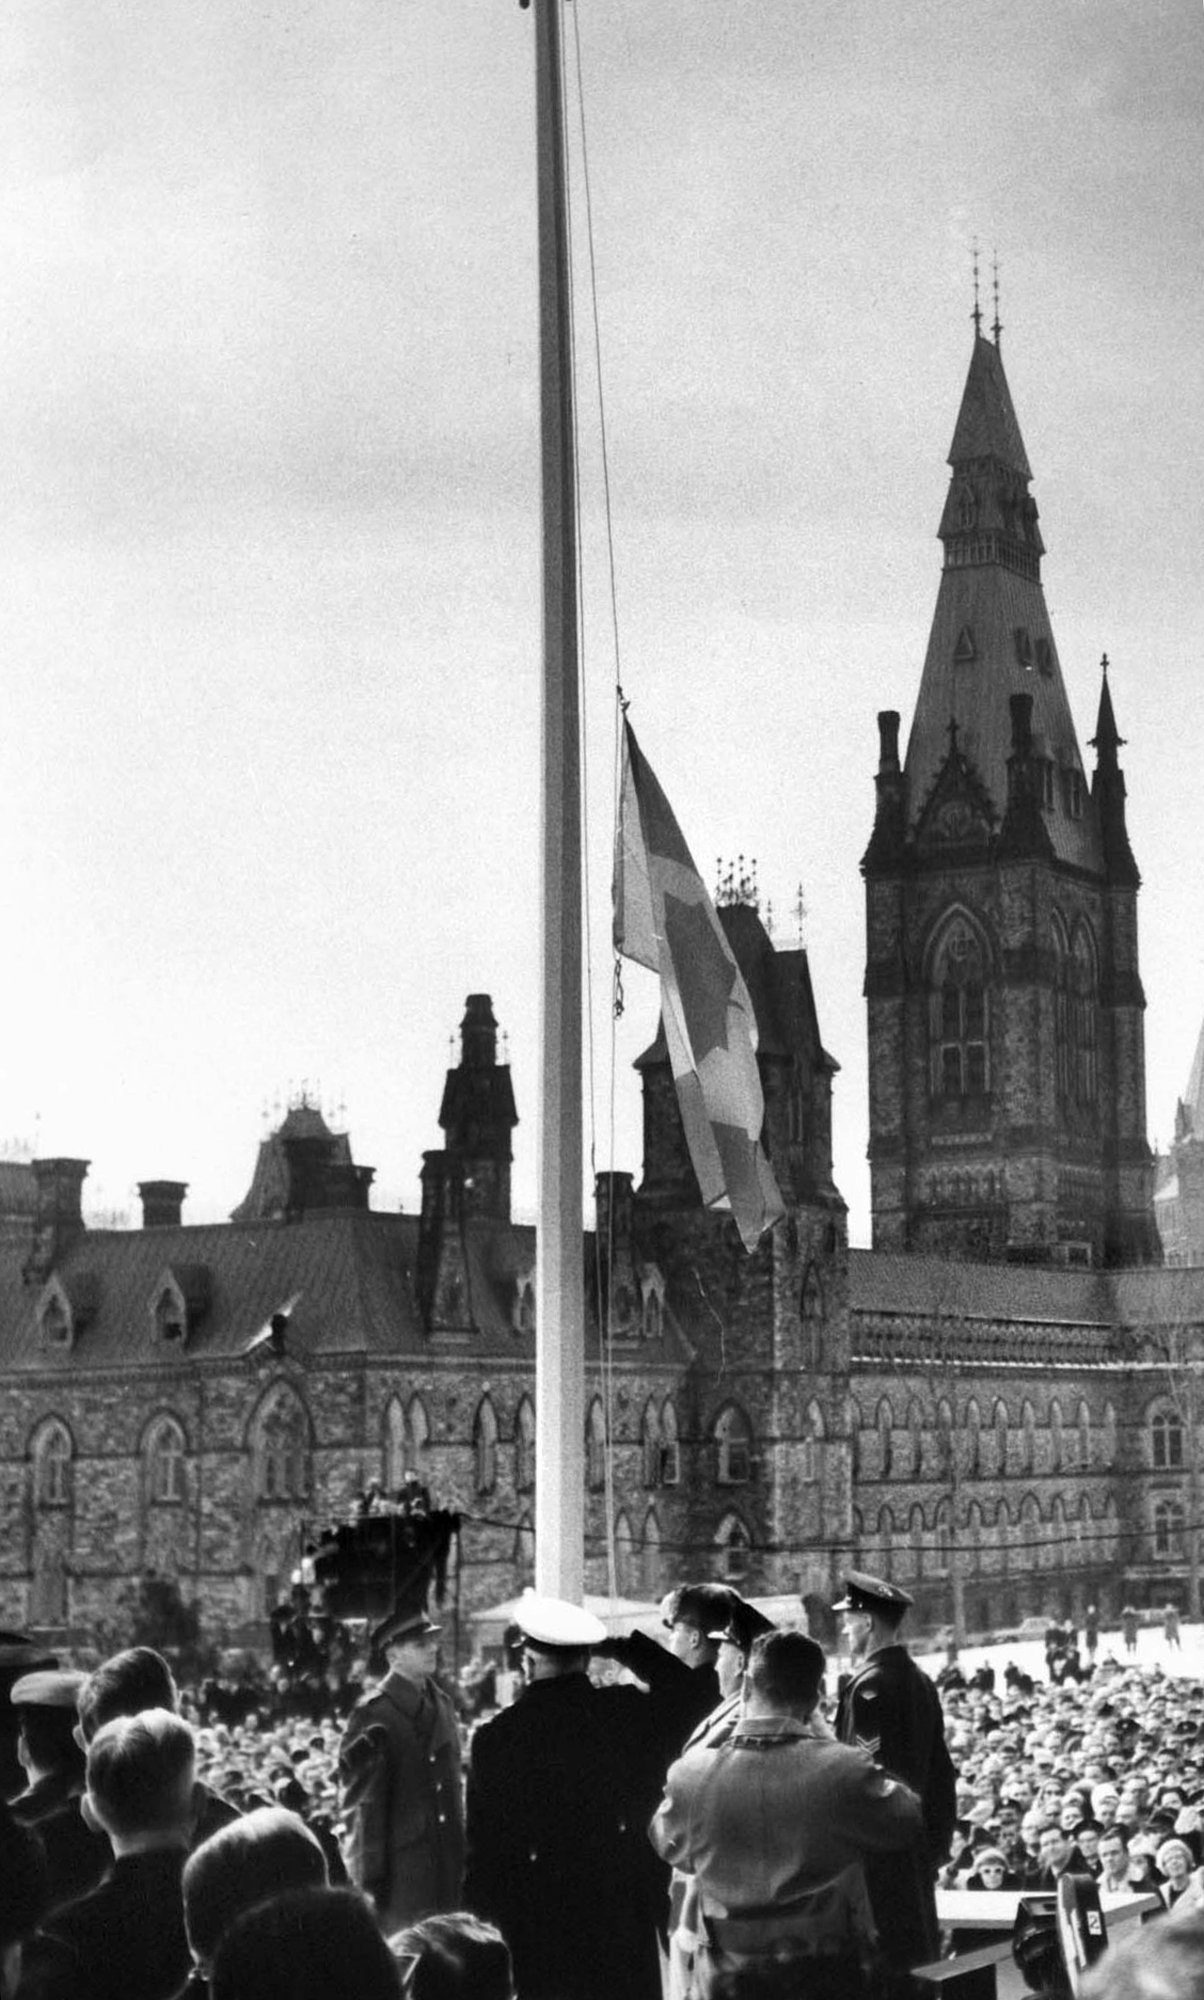 RCMP Constable Joseph Secours raises Canada's Maple Leaf flag on the flagpole at base of Peace Tower on Parliament Hill in Ottawa February 15, 1965. (CP Photo)